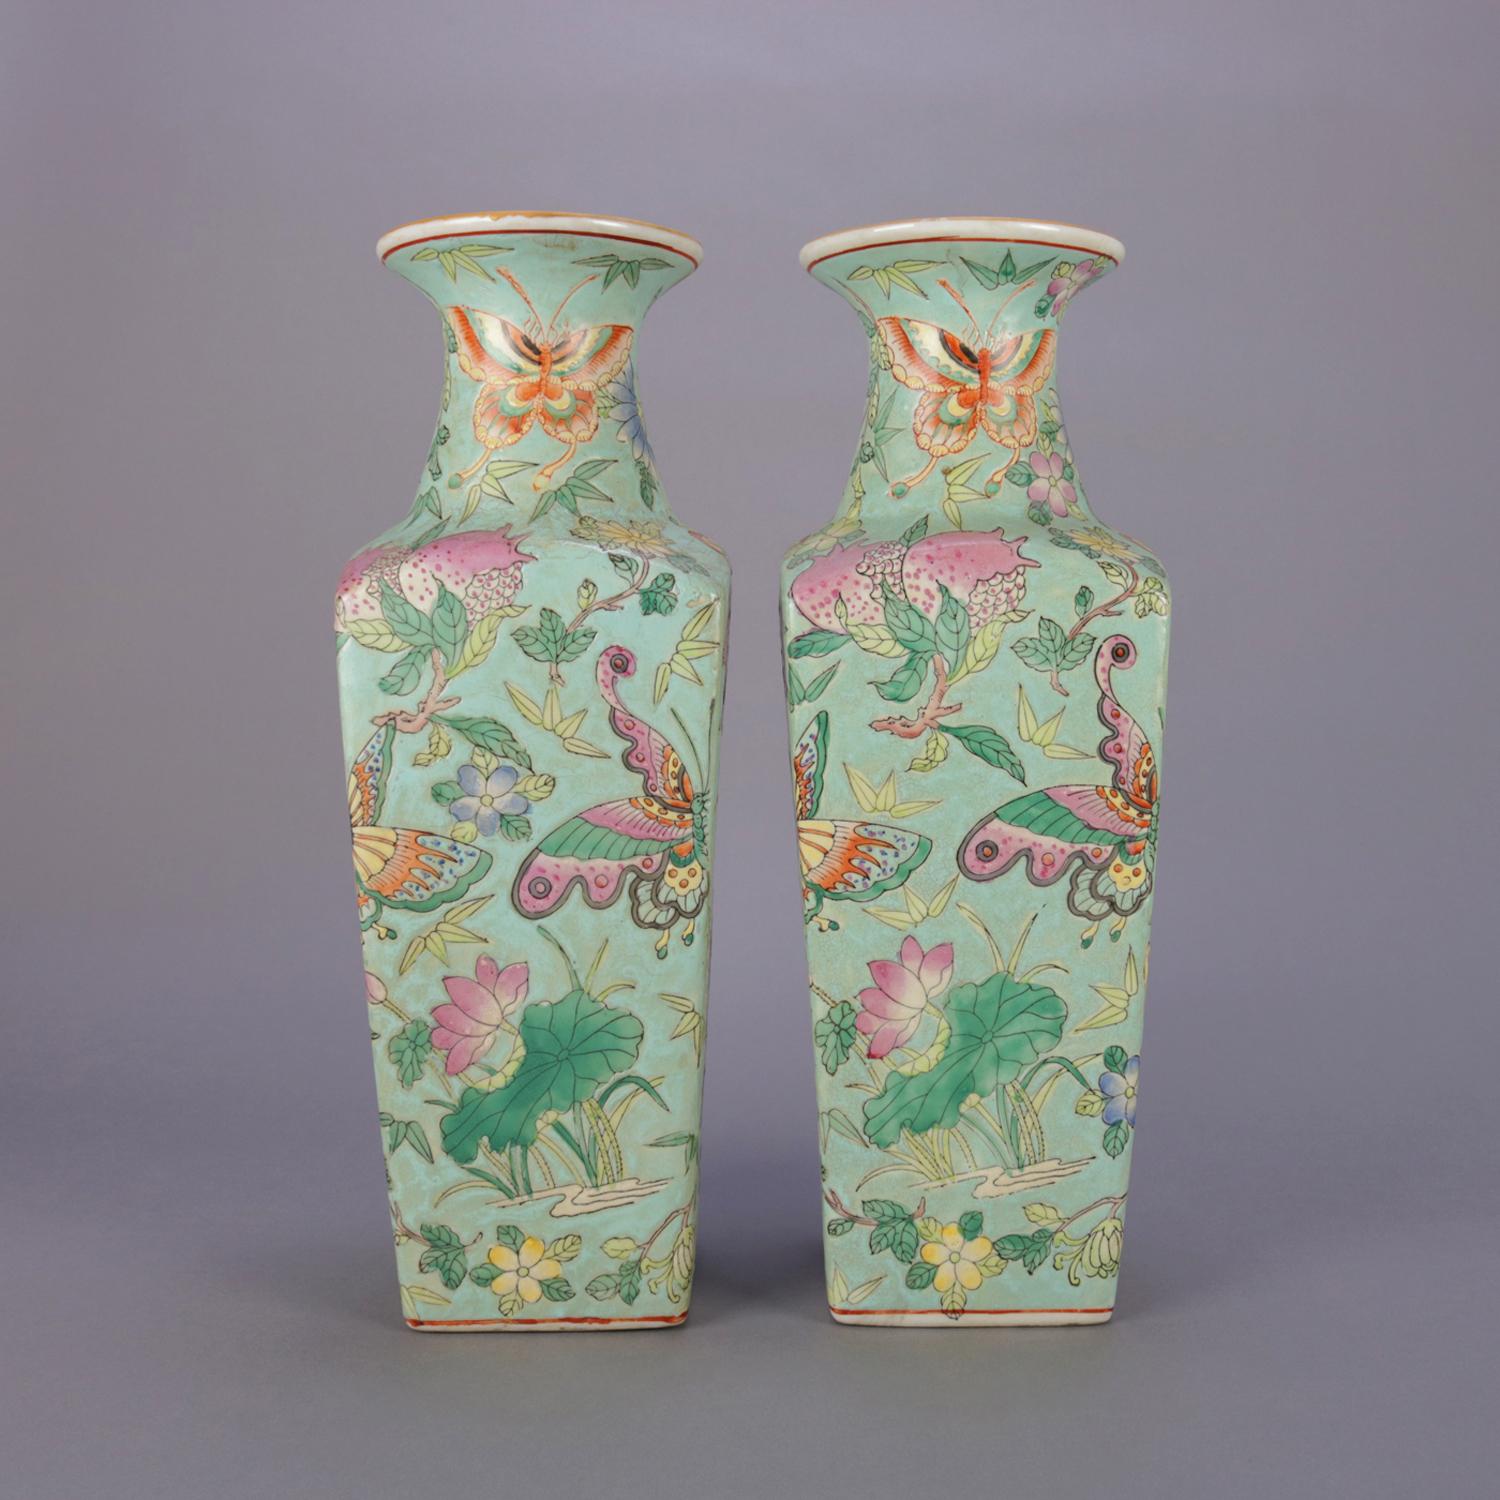 Pair of antique Chinese Famille rose porcelain vases feature block form bases with flared mouth, hand painted overall butterfly garden design, chop mark signed on bases, circa 1900

Measures - 16